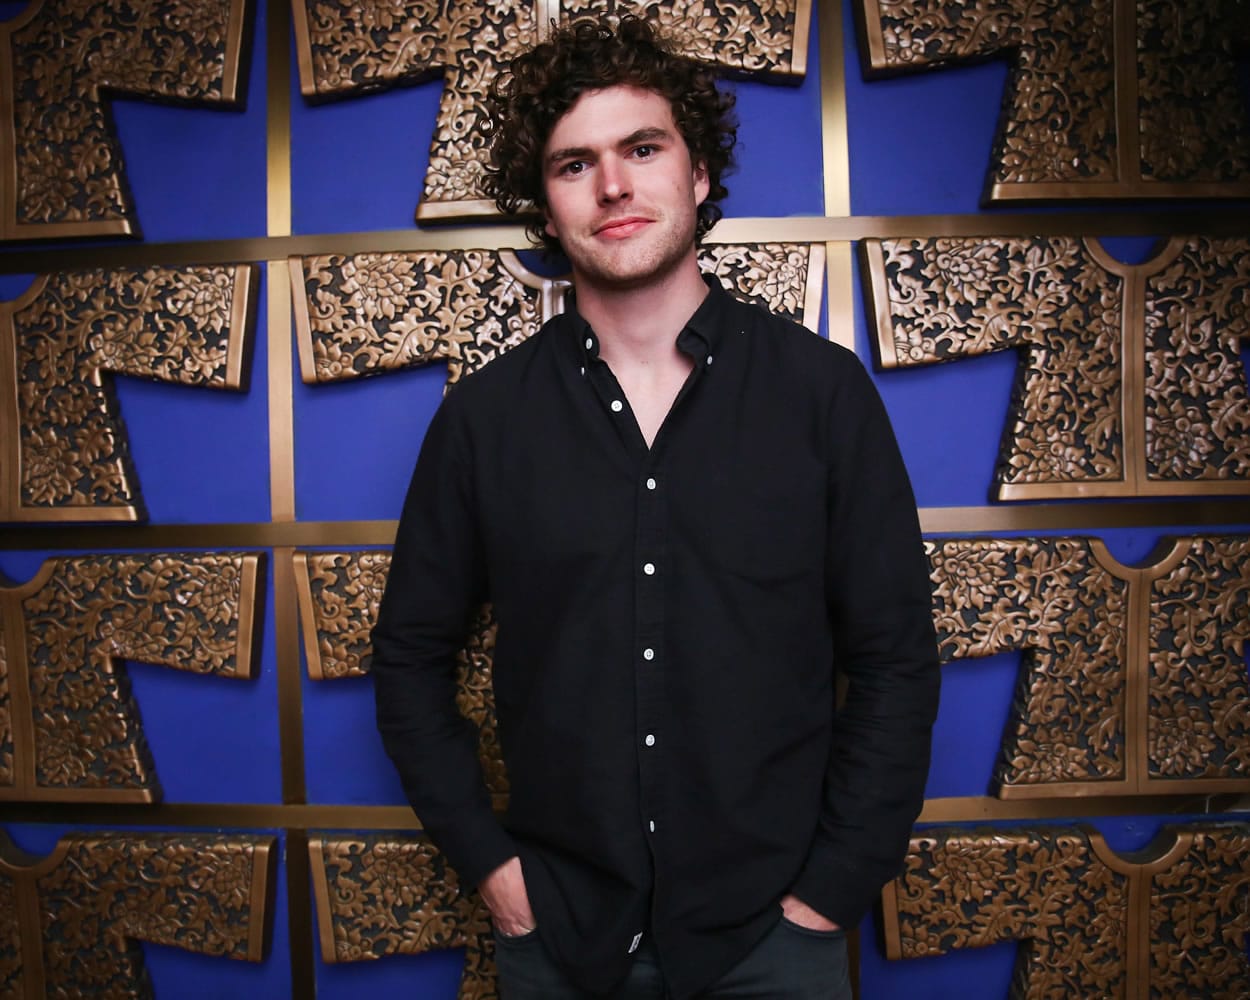 Vance Joy attends an event June 4 in New York.